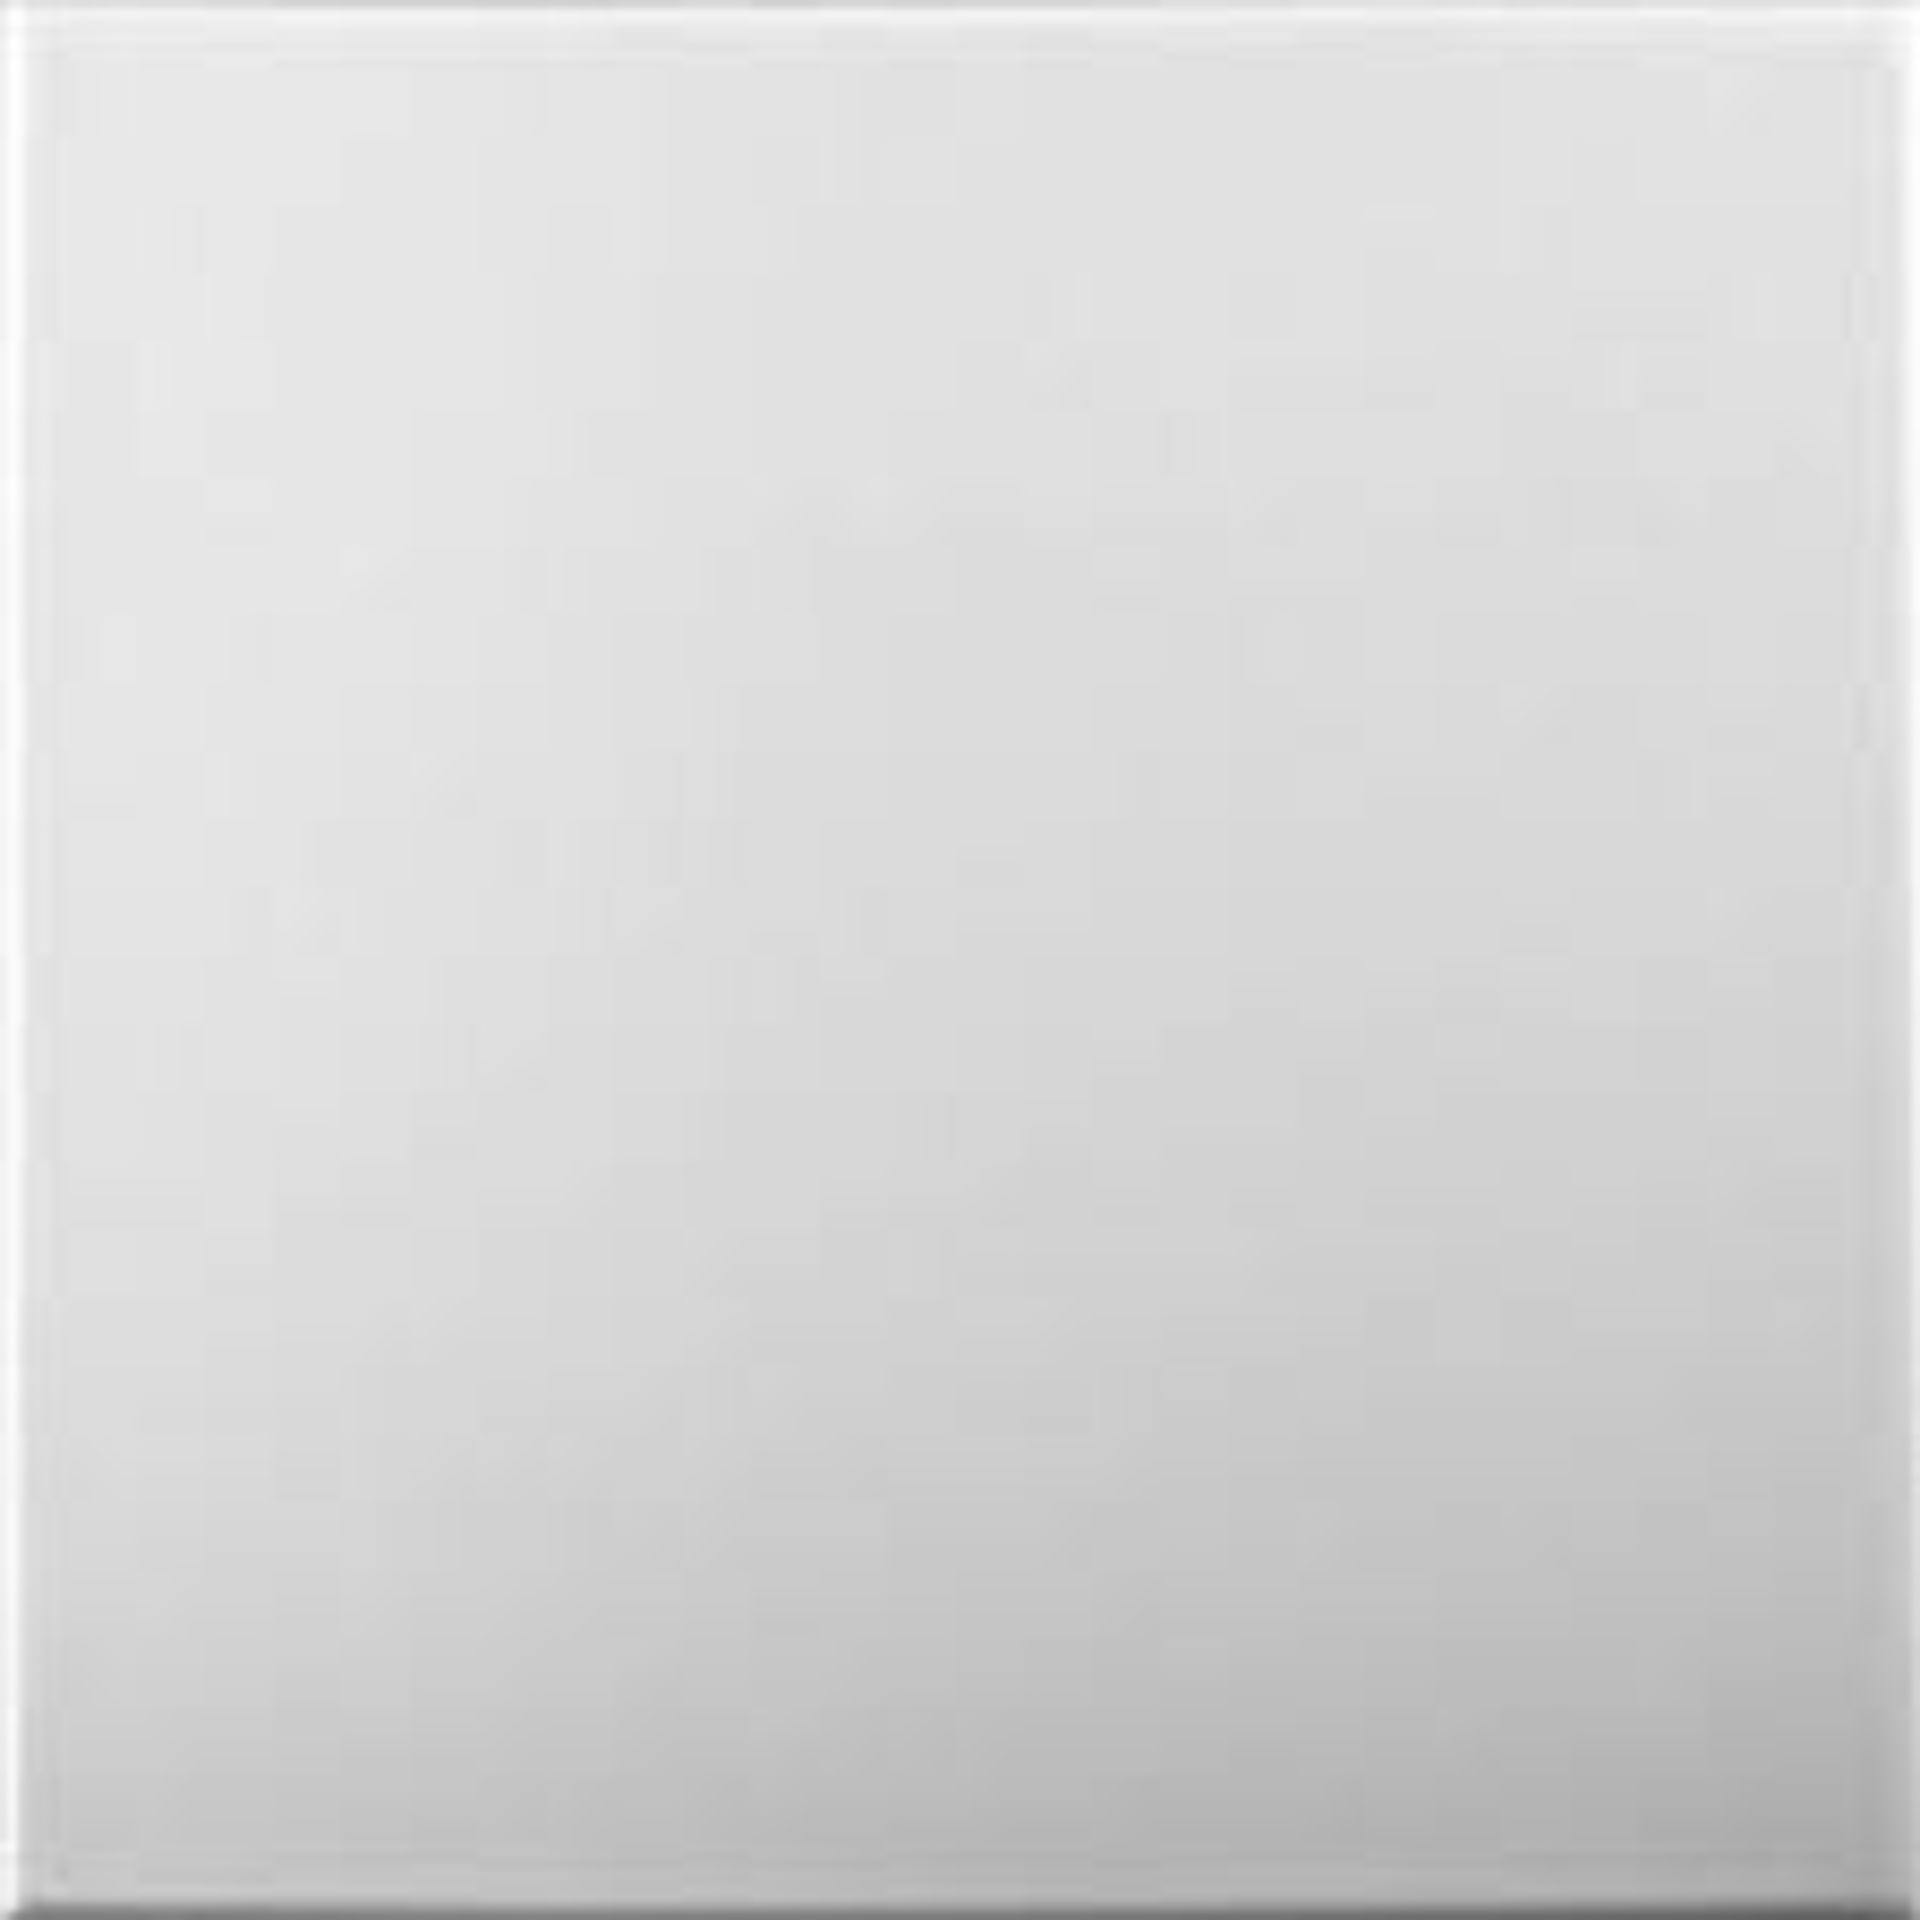 Alpina Decorations White Blank: Decorative Ceiling And Wall Panels 2M2 (21.52 Sqft) - 8 Panels -